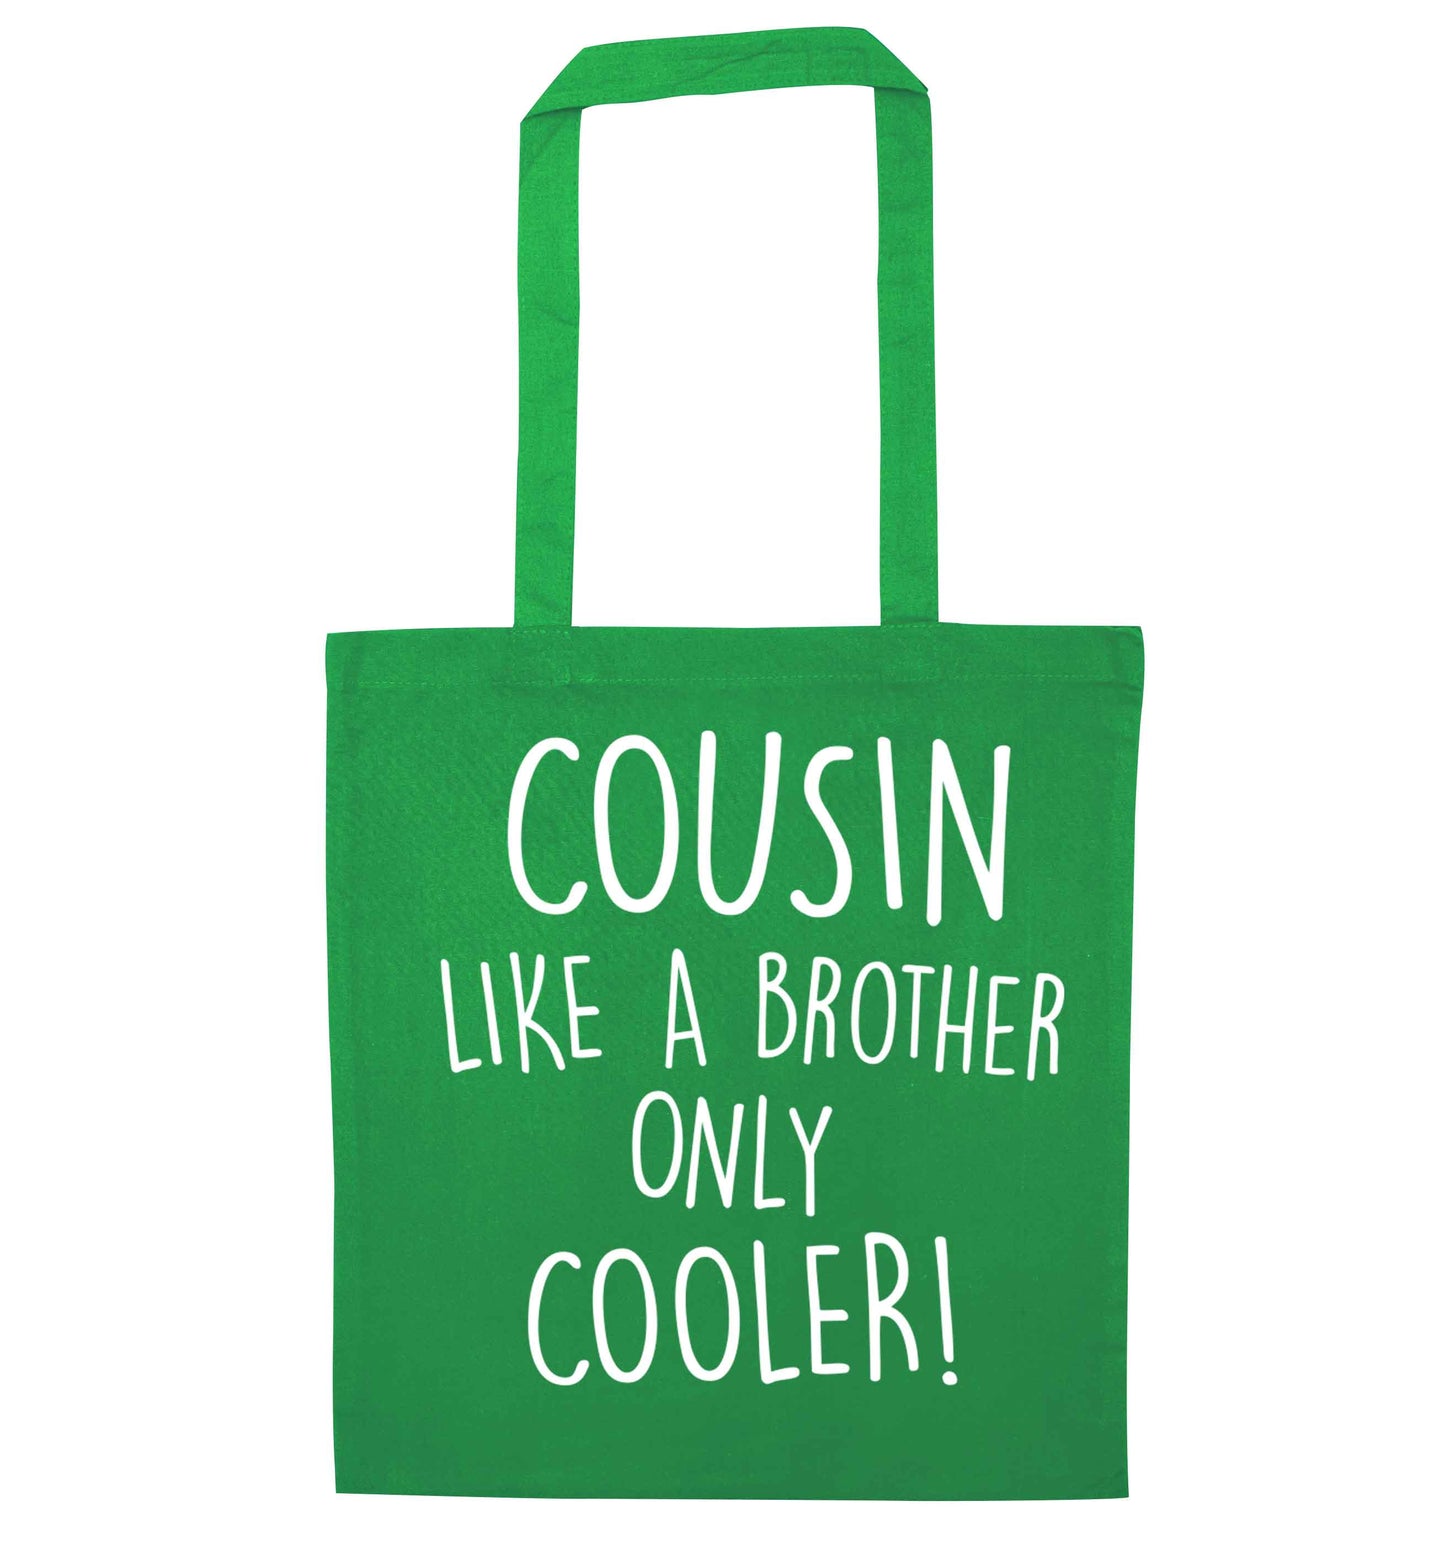 Cousin like a brother only cooler green tote bag